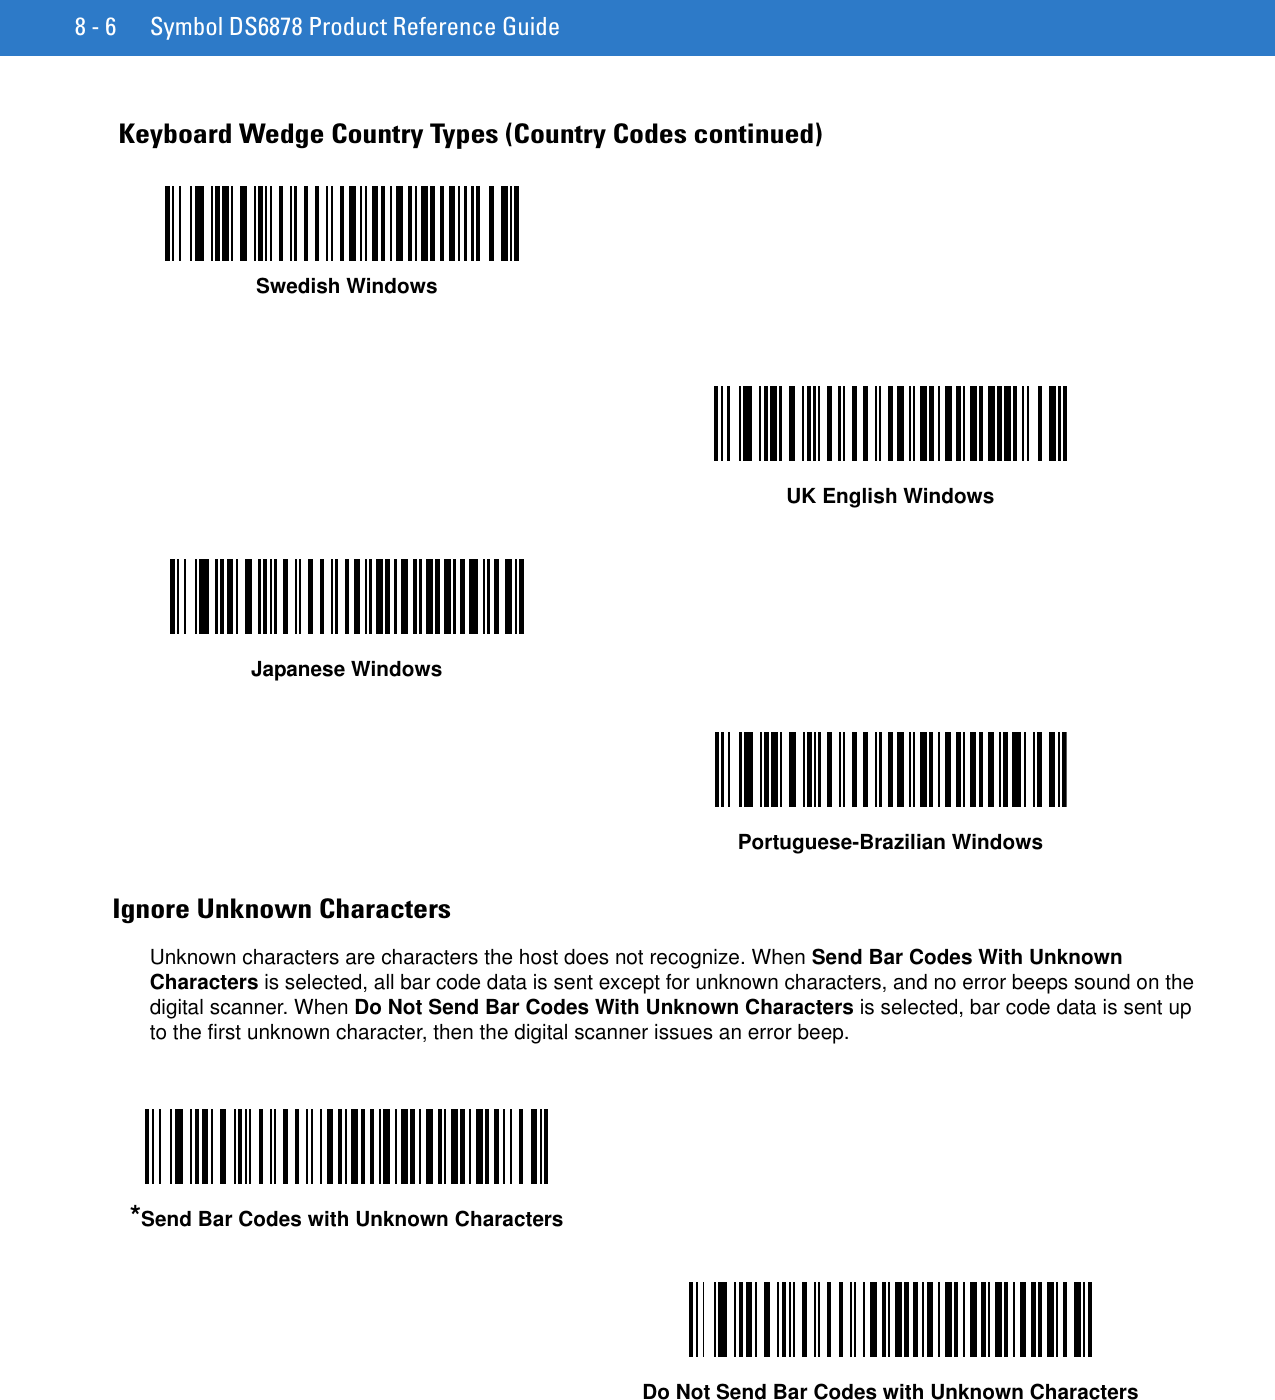 8 - 6 Symbol DS6878 Product Reference GuideIgnore Unknown CharactersUnknown characters are characters the host does not recognize. When Send Bar Codes With Unknown Characters is selected, all bar code data is sent except for unknown characters, and no error beeps sound on the digital scanner. When Do Not Send Bar Codes With Unknown Characters is selected, bar code data is sent up to the first unknown character, then the digital scanner issues an error beep.Keyboard Wedge Country Types (Country Codes continued)Swedish WindowsUK English WindowsJapanese WindowsPortuguese-Brazilian Windows*Send Bar Codes with Unknown CharactersDo Not Send Bar Codes with Unknown Characters